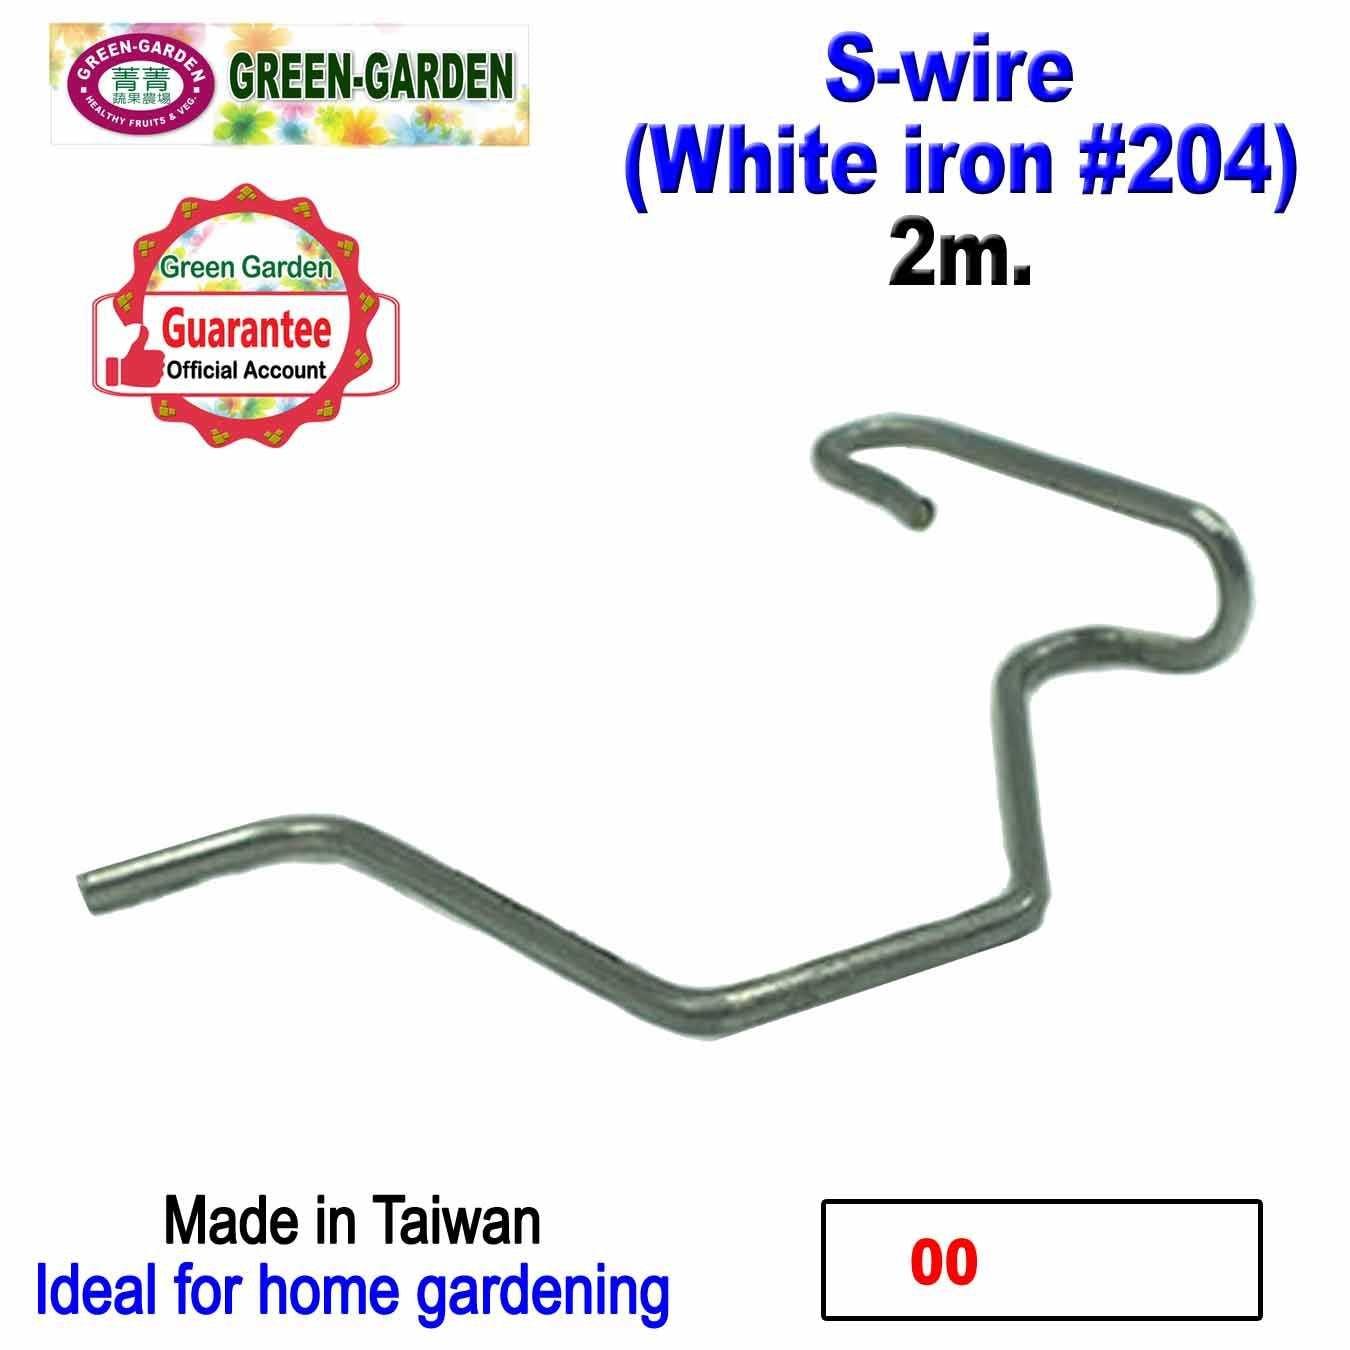 Green House Part  S-Wire (White Iron #204)